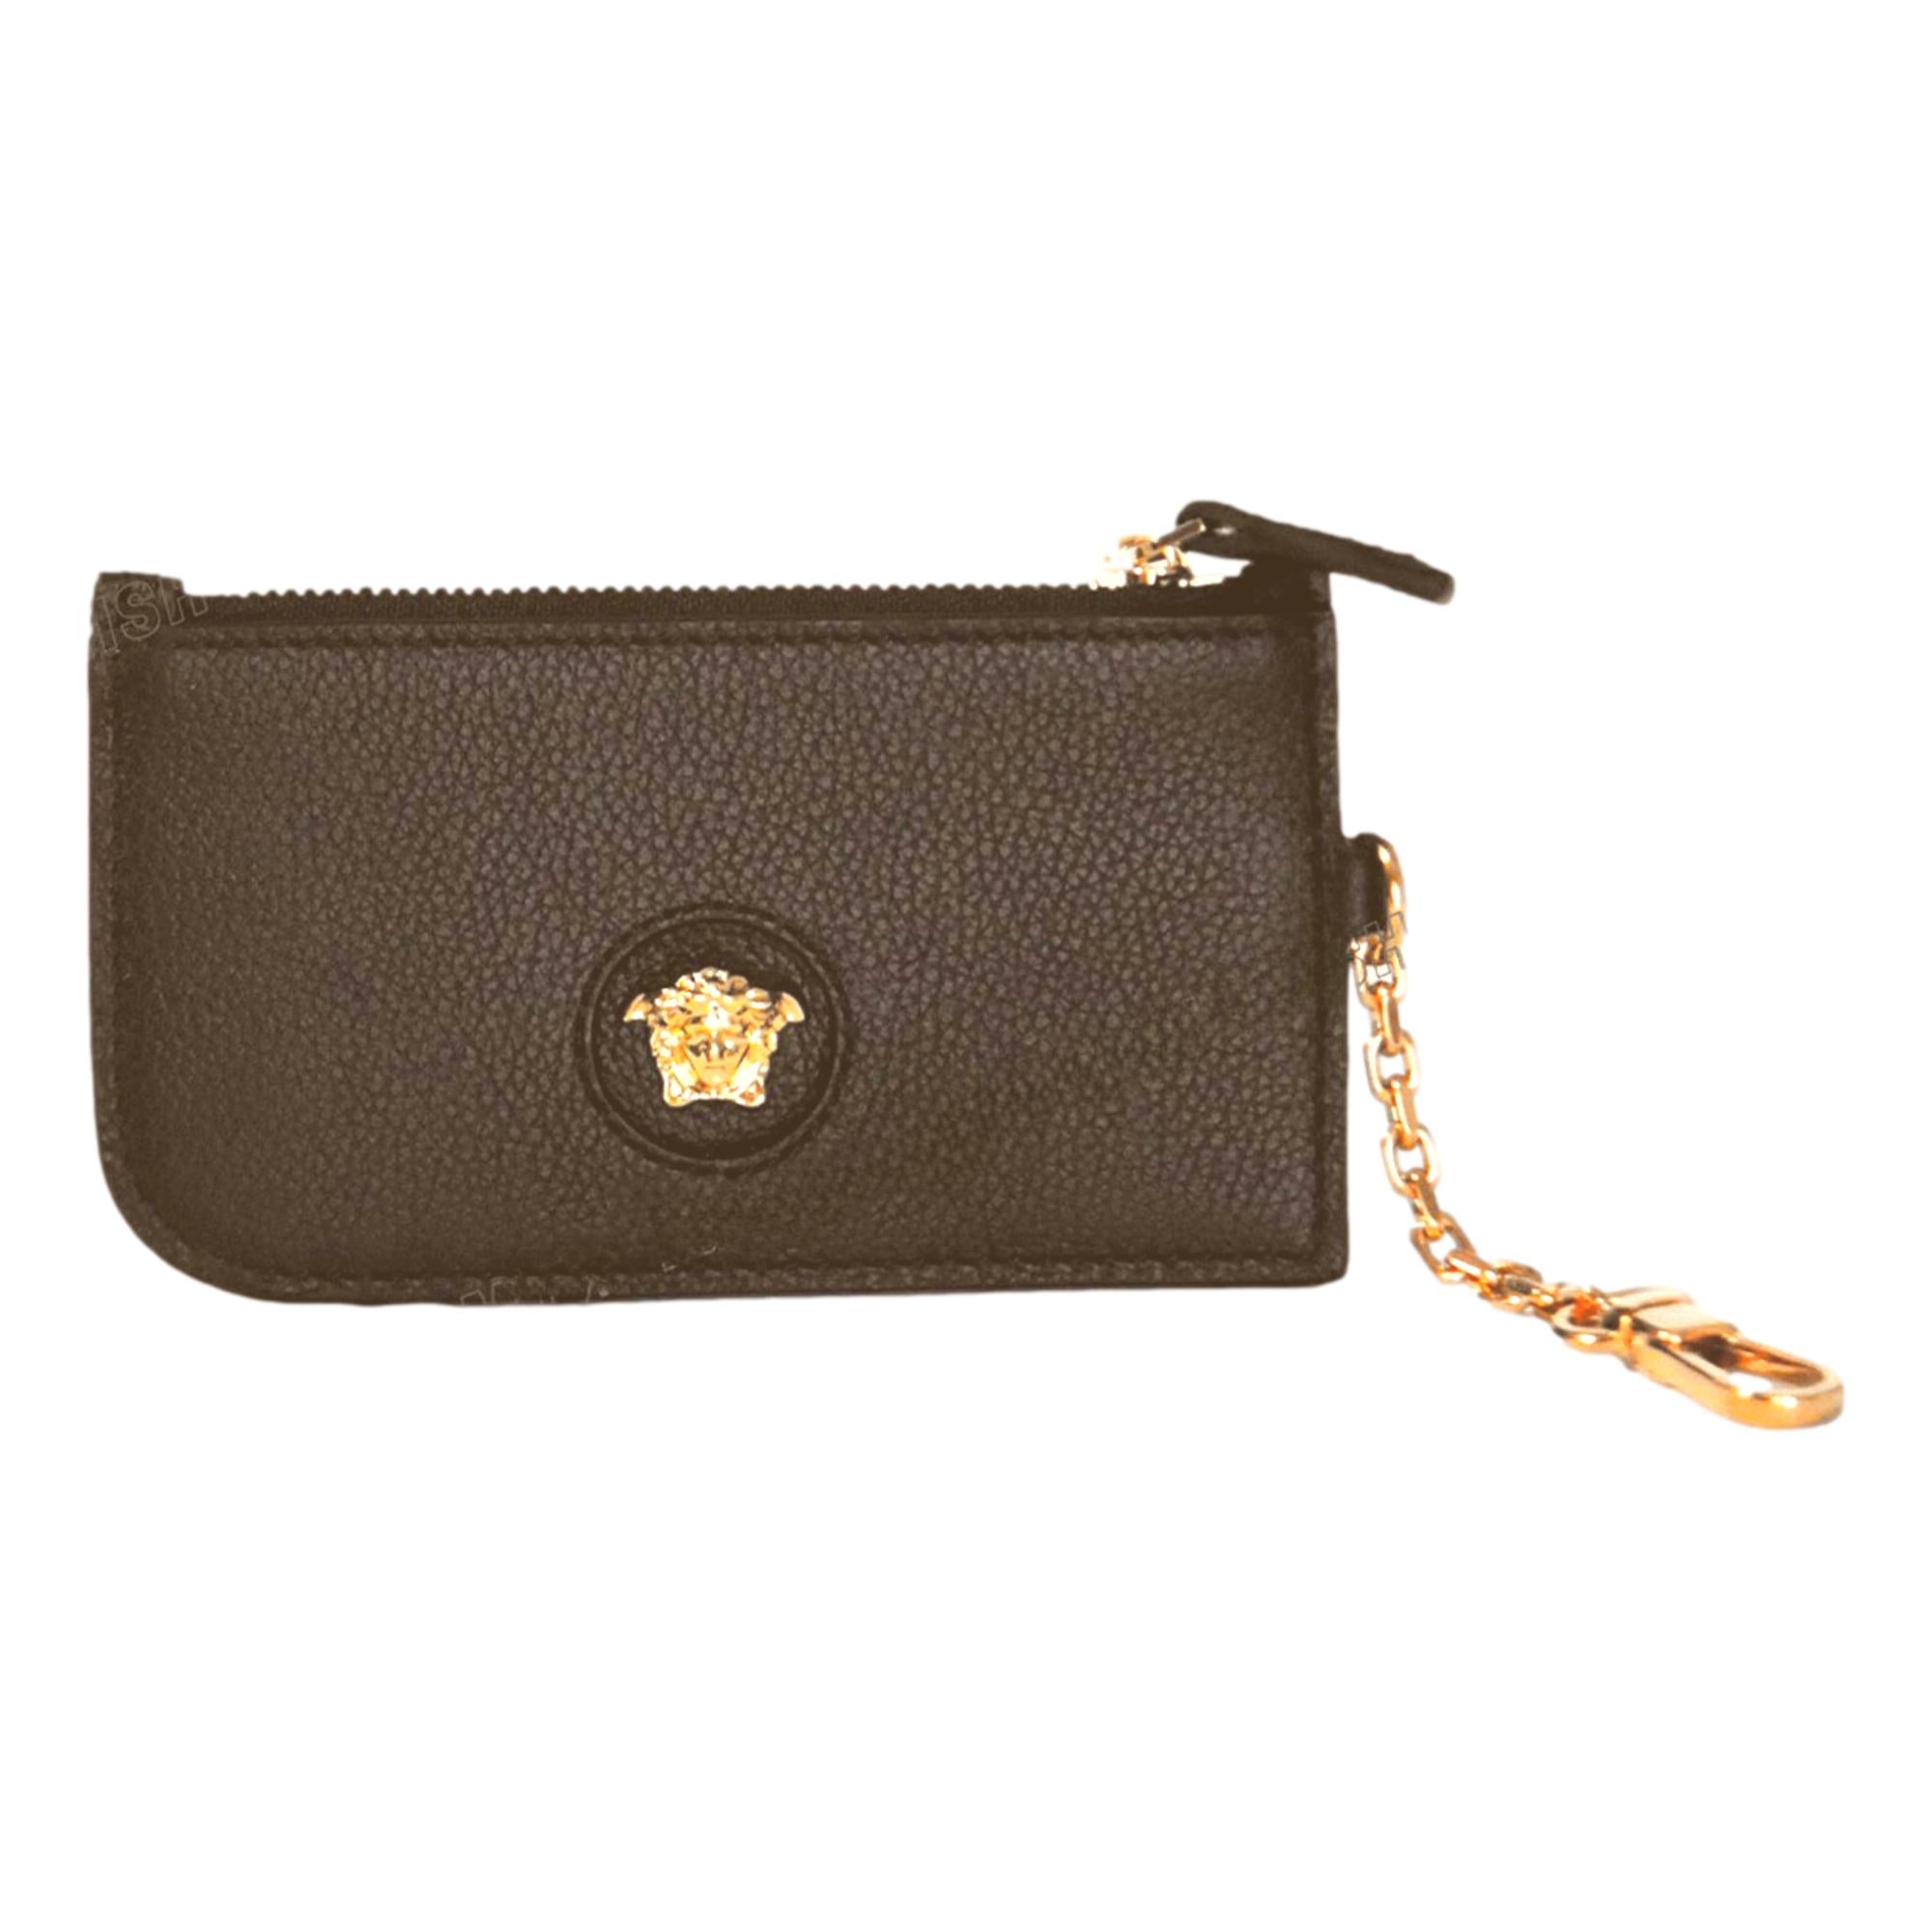 Medusa leather coin purse in black - Versace